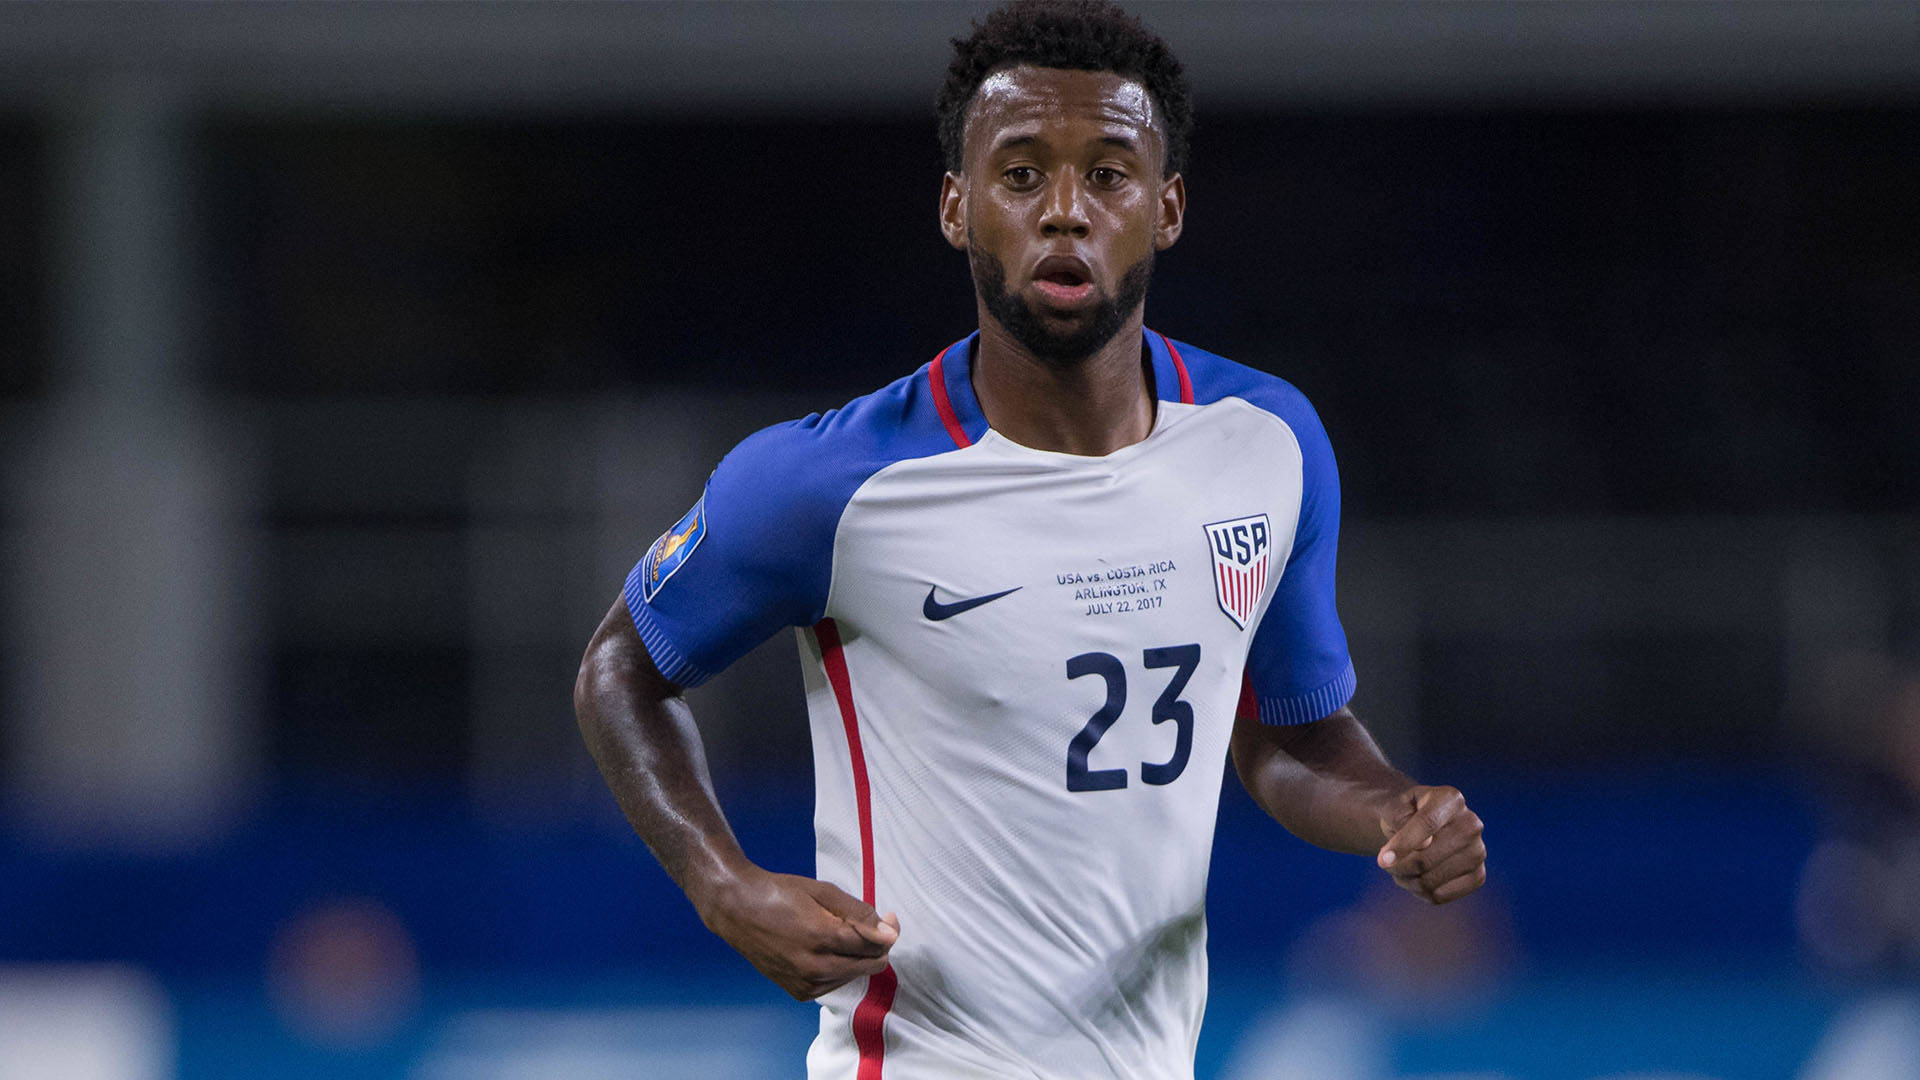 Kellyn Acosta in Action During the United States vs Portugal Match Wallpaper